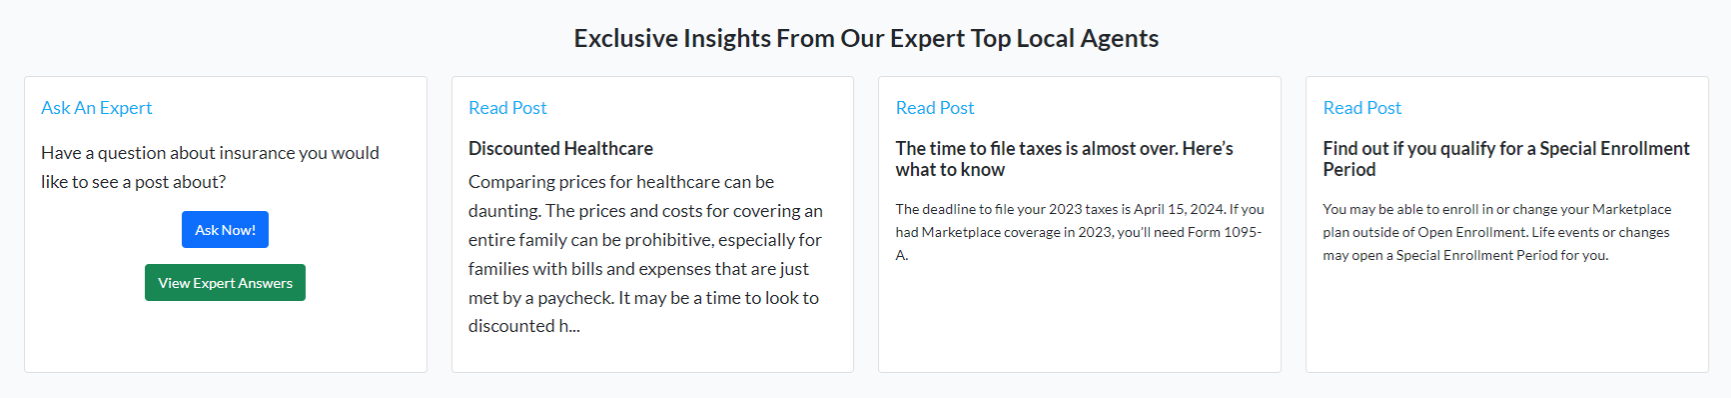 Insurance Agent - Exclusive Insights